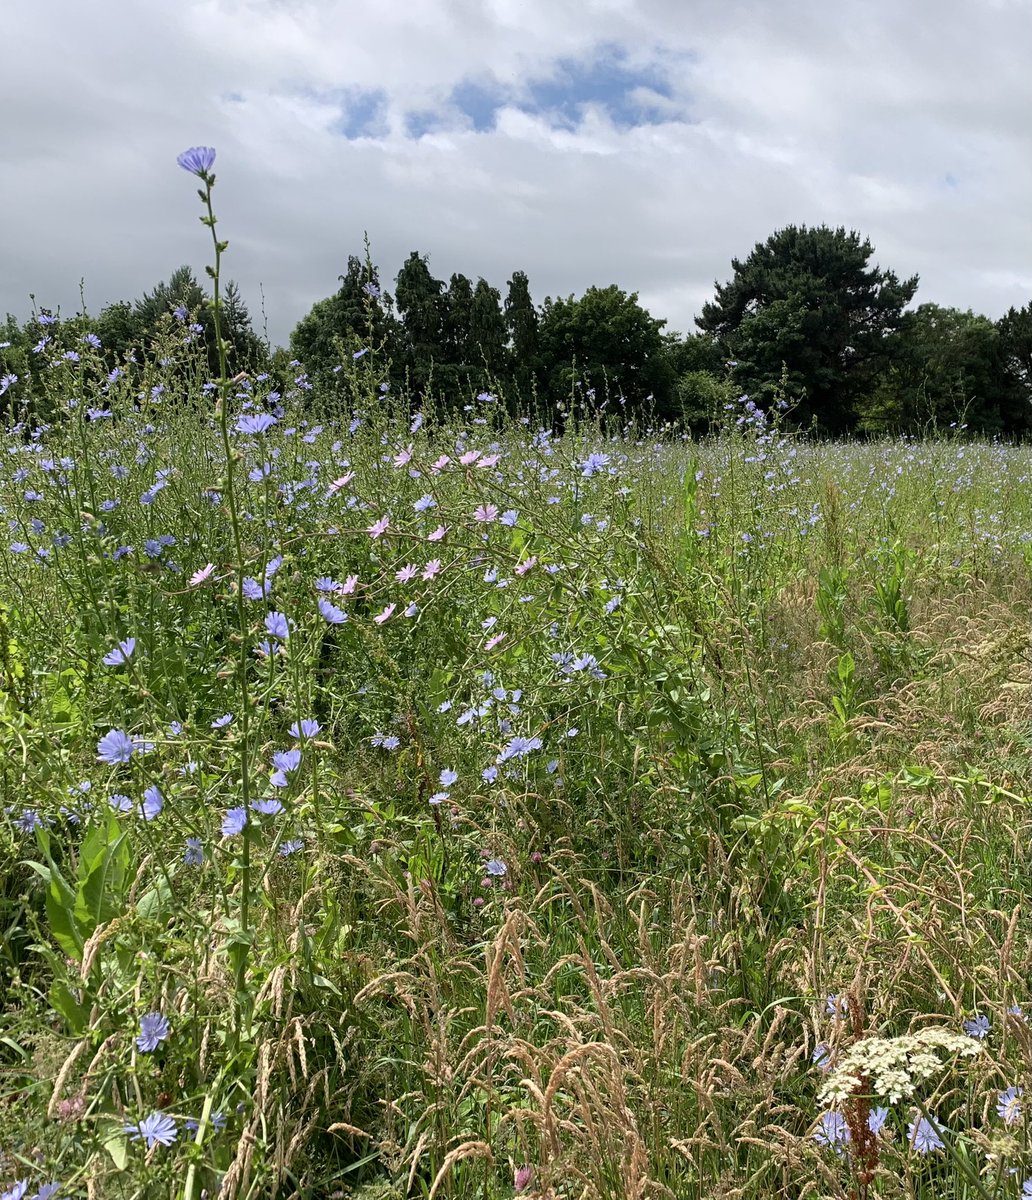 Hunter’s wild flower meadow is in full bloom with Chicory and other wild flowers. This is the perfect weekend to visit Wicklow “The Garden of Ireland”. hunters.ie visitwicklow.ie